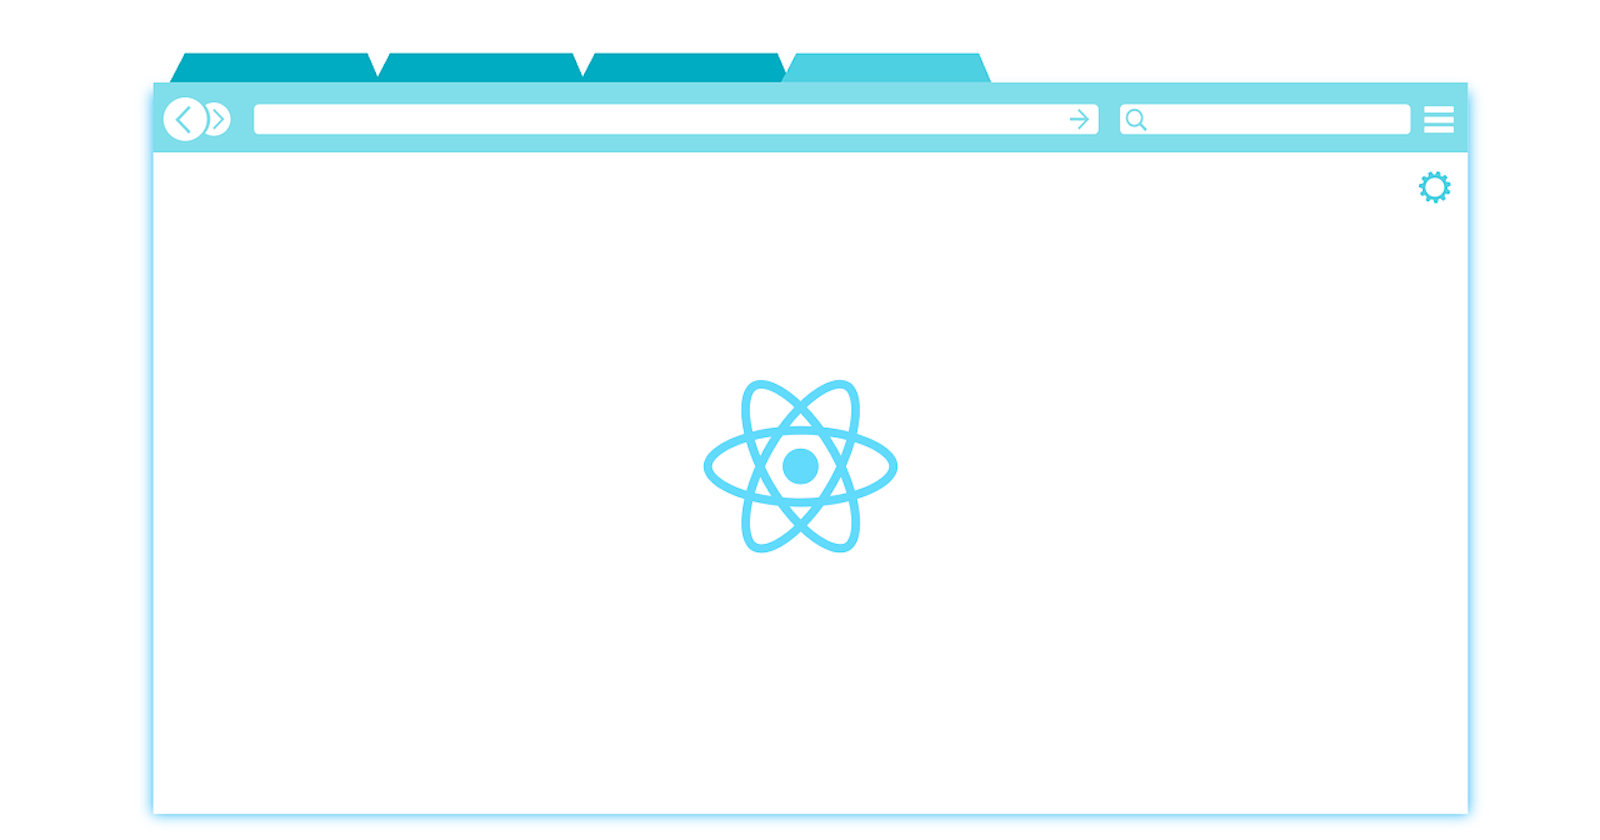 Prevent Window From Closing in React.js